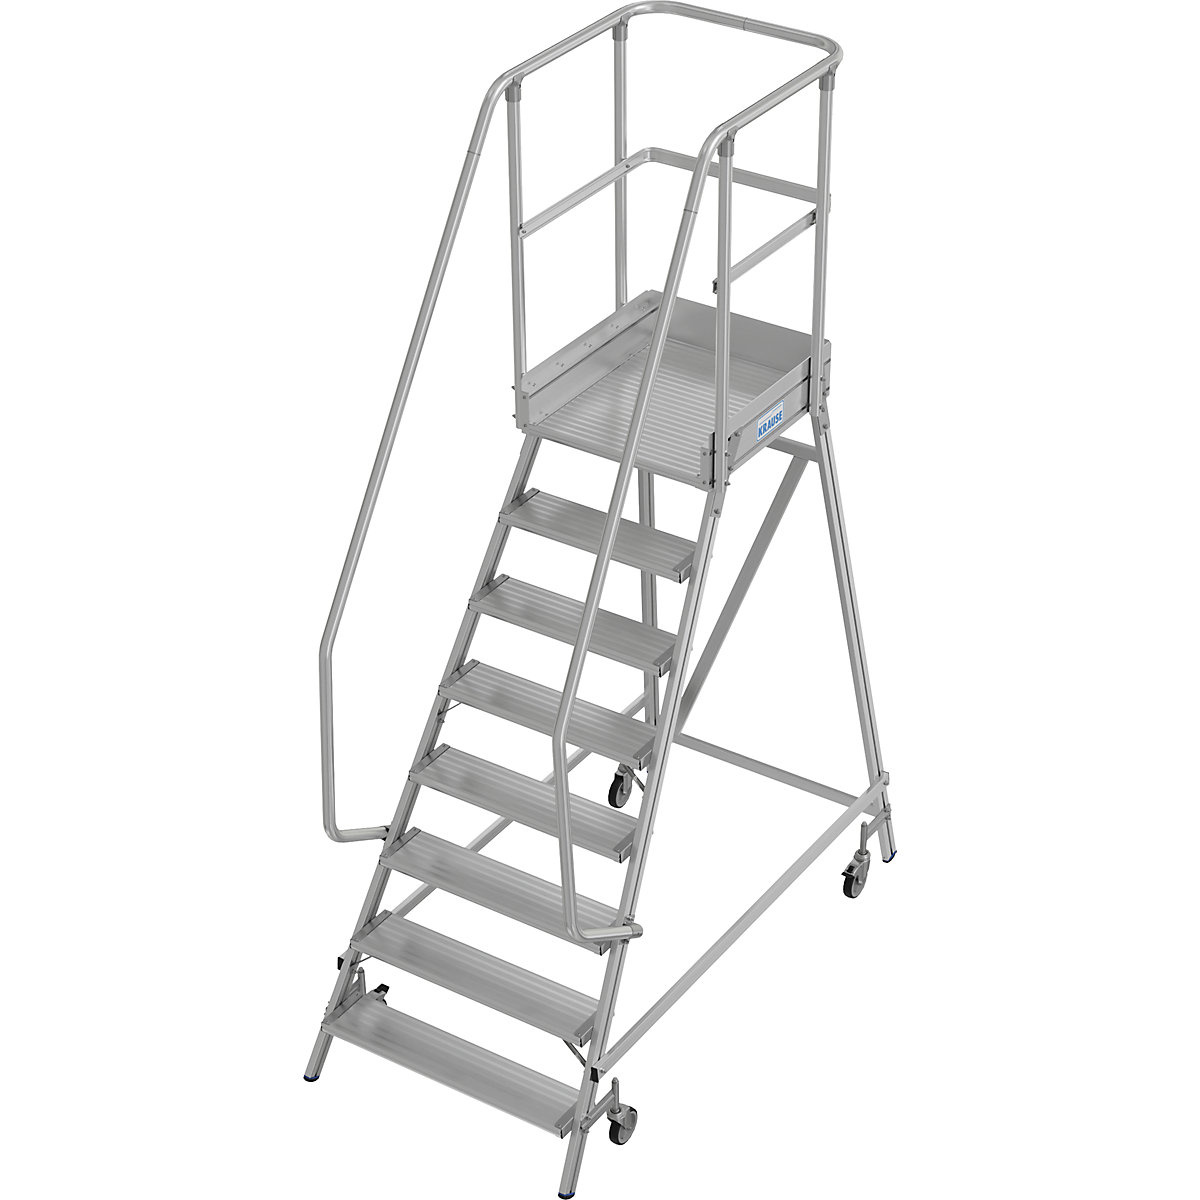 Mobile safety steps – KRAUSE, single sided access, foot rail, 8 steps-8